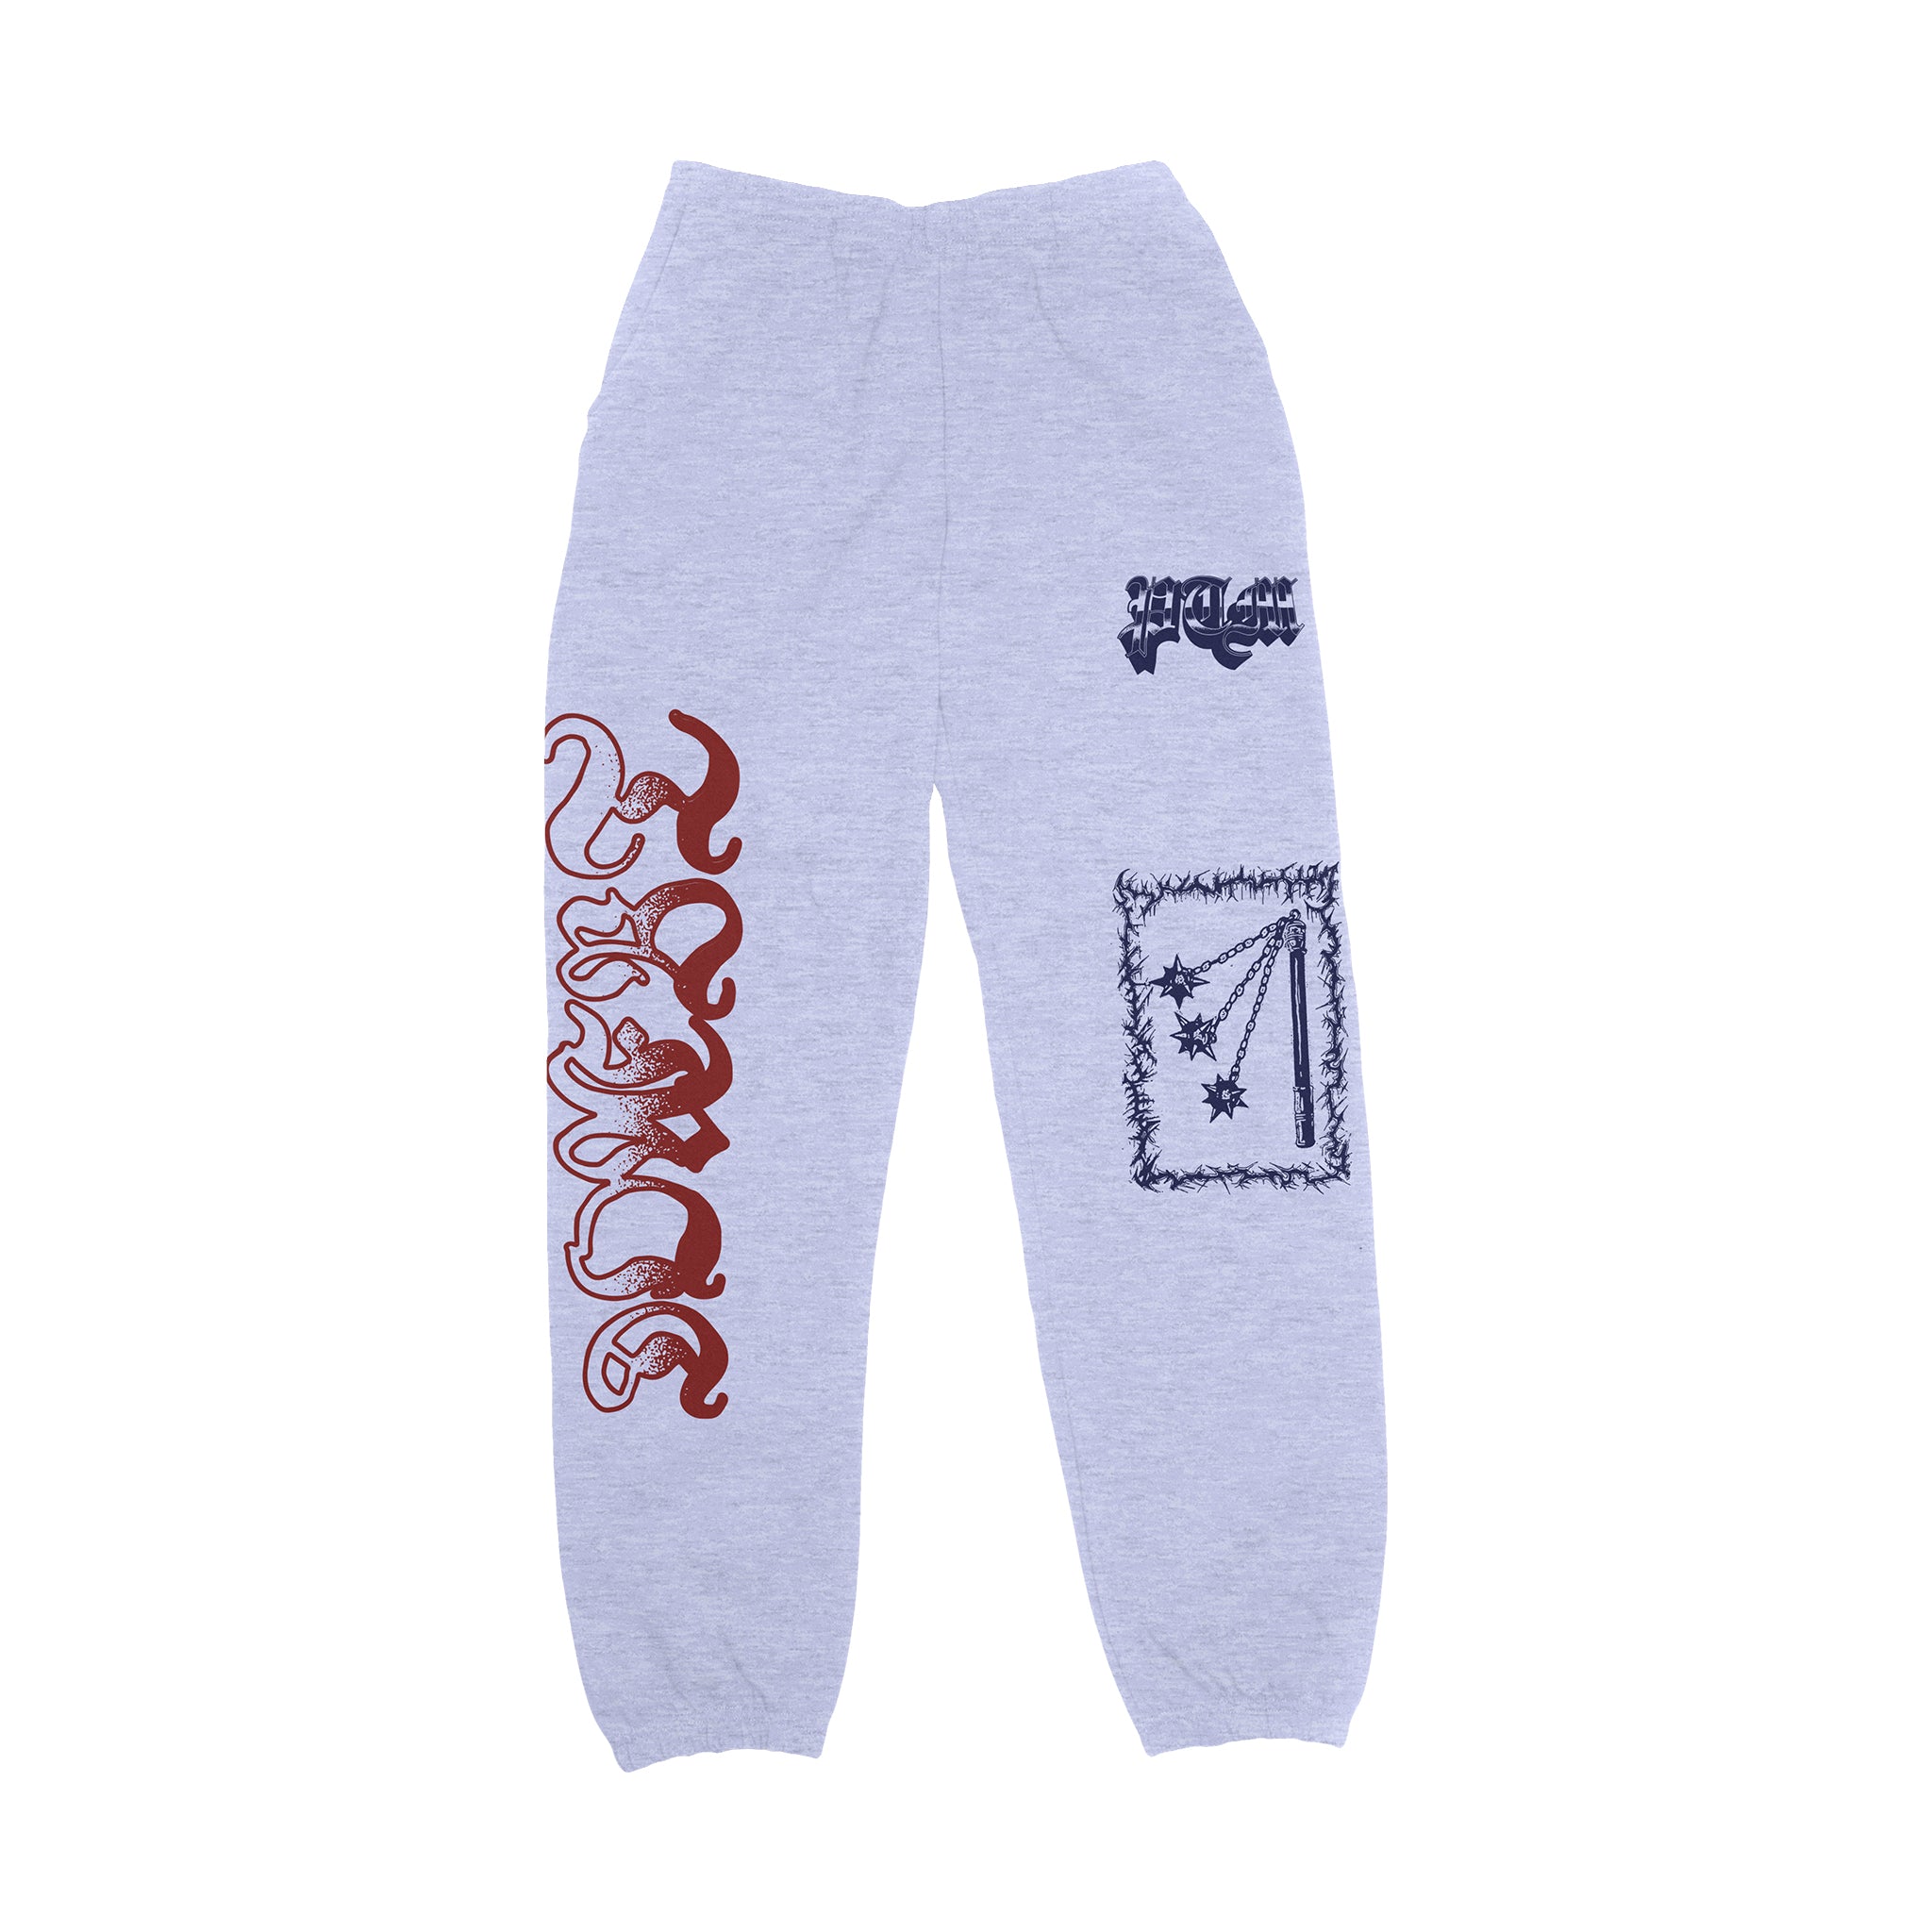 A Co Unisex Sweatpants. These Sweatpants are NOT Approved for PT. –  FortCarsonSwag